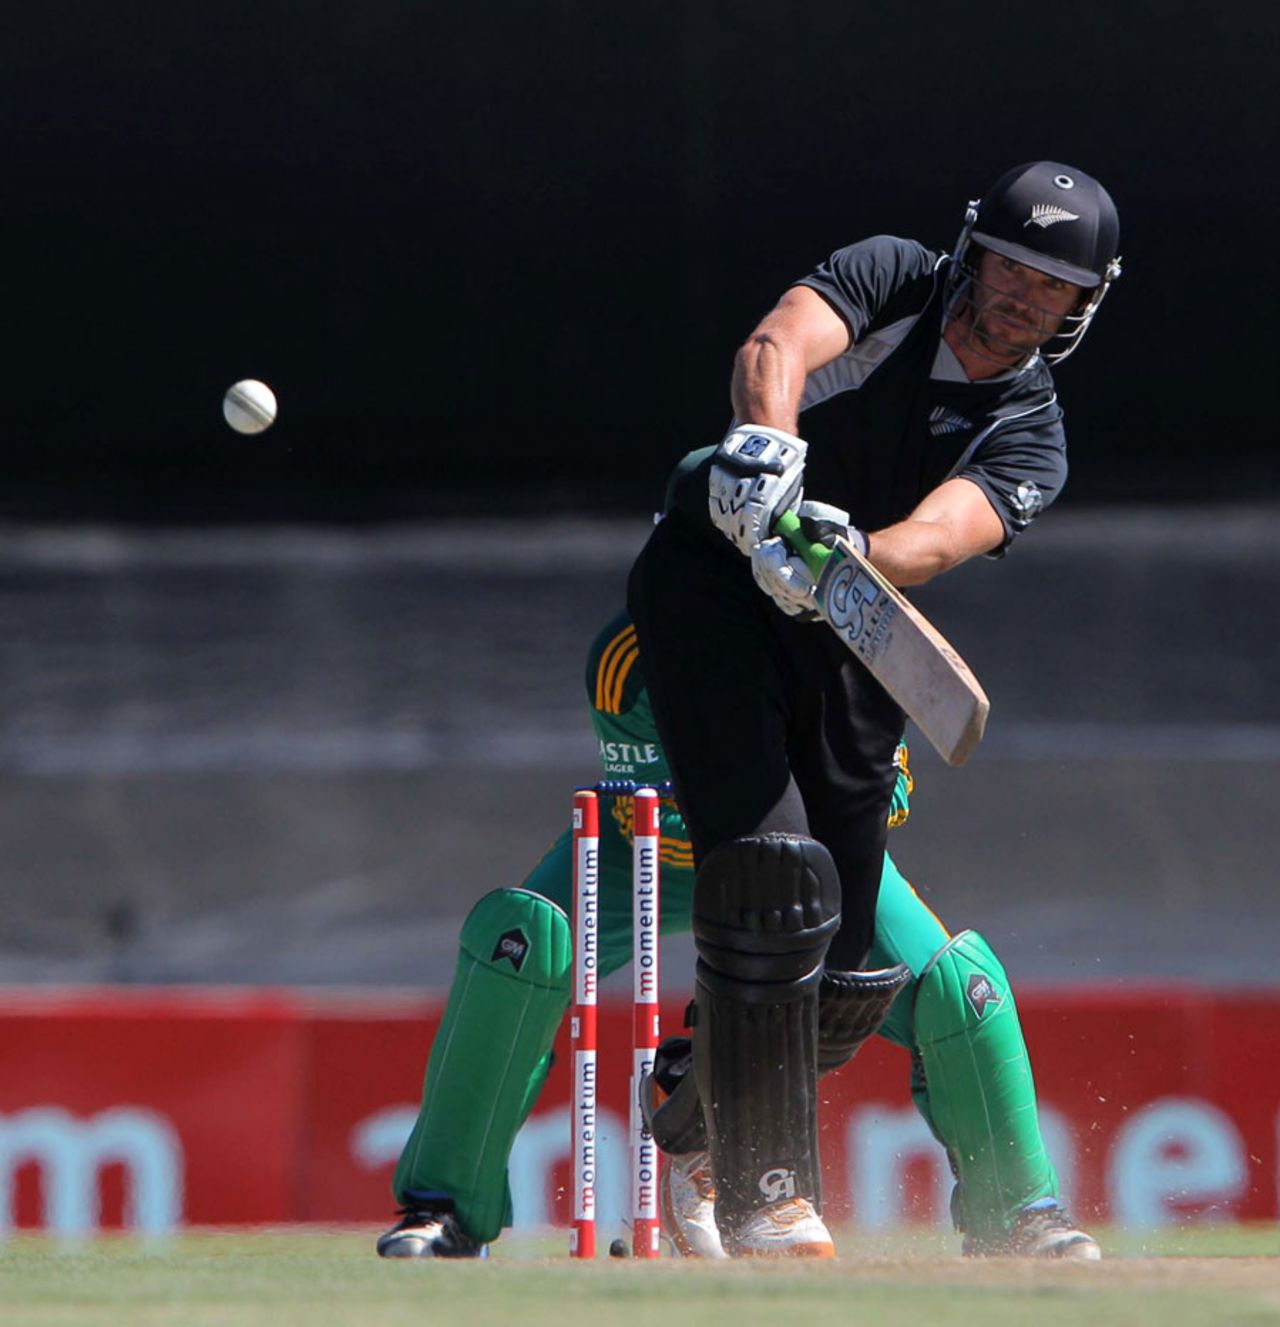 James Franklin battled hard and steered New Zealand to an unlikely victory with 47 not out, South Africa v New Zealand, 1st ODI, Paarl, January 19, 2013